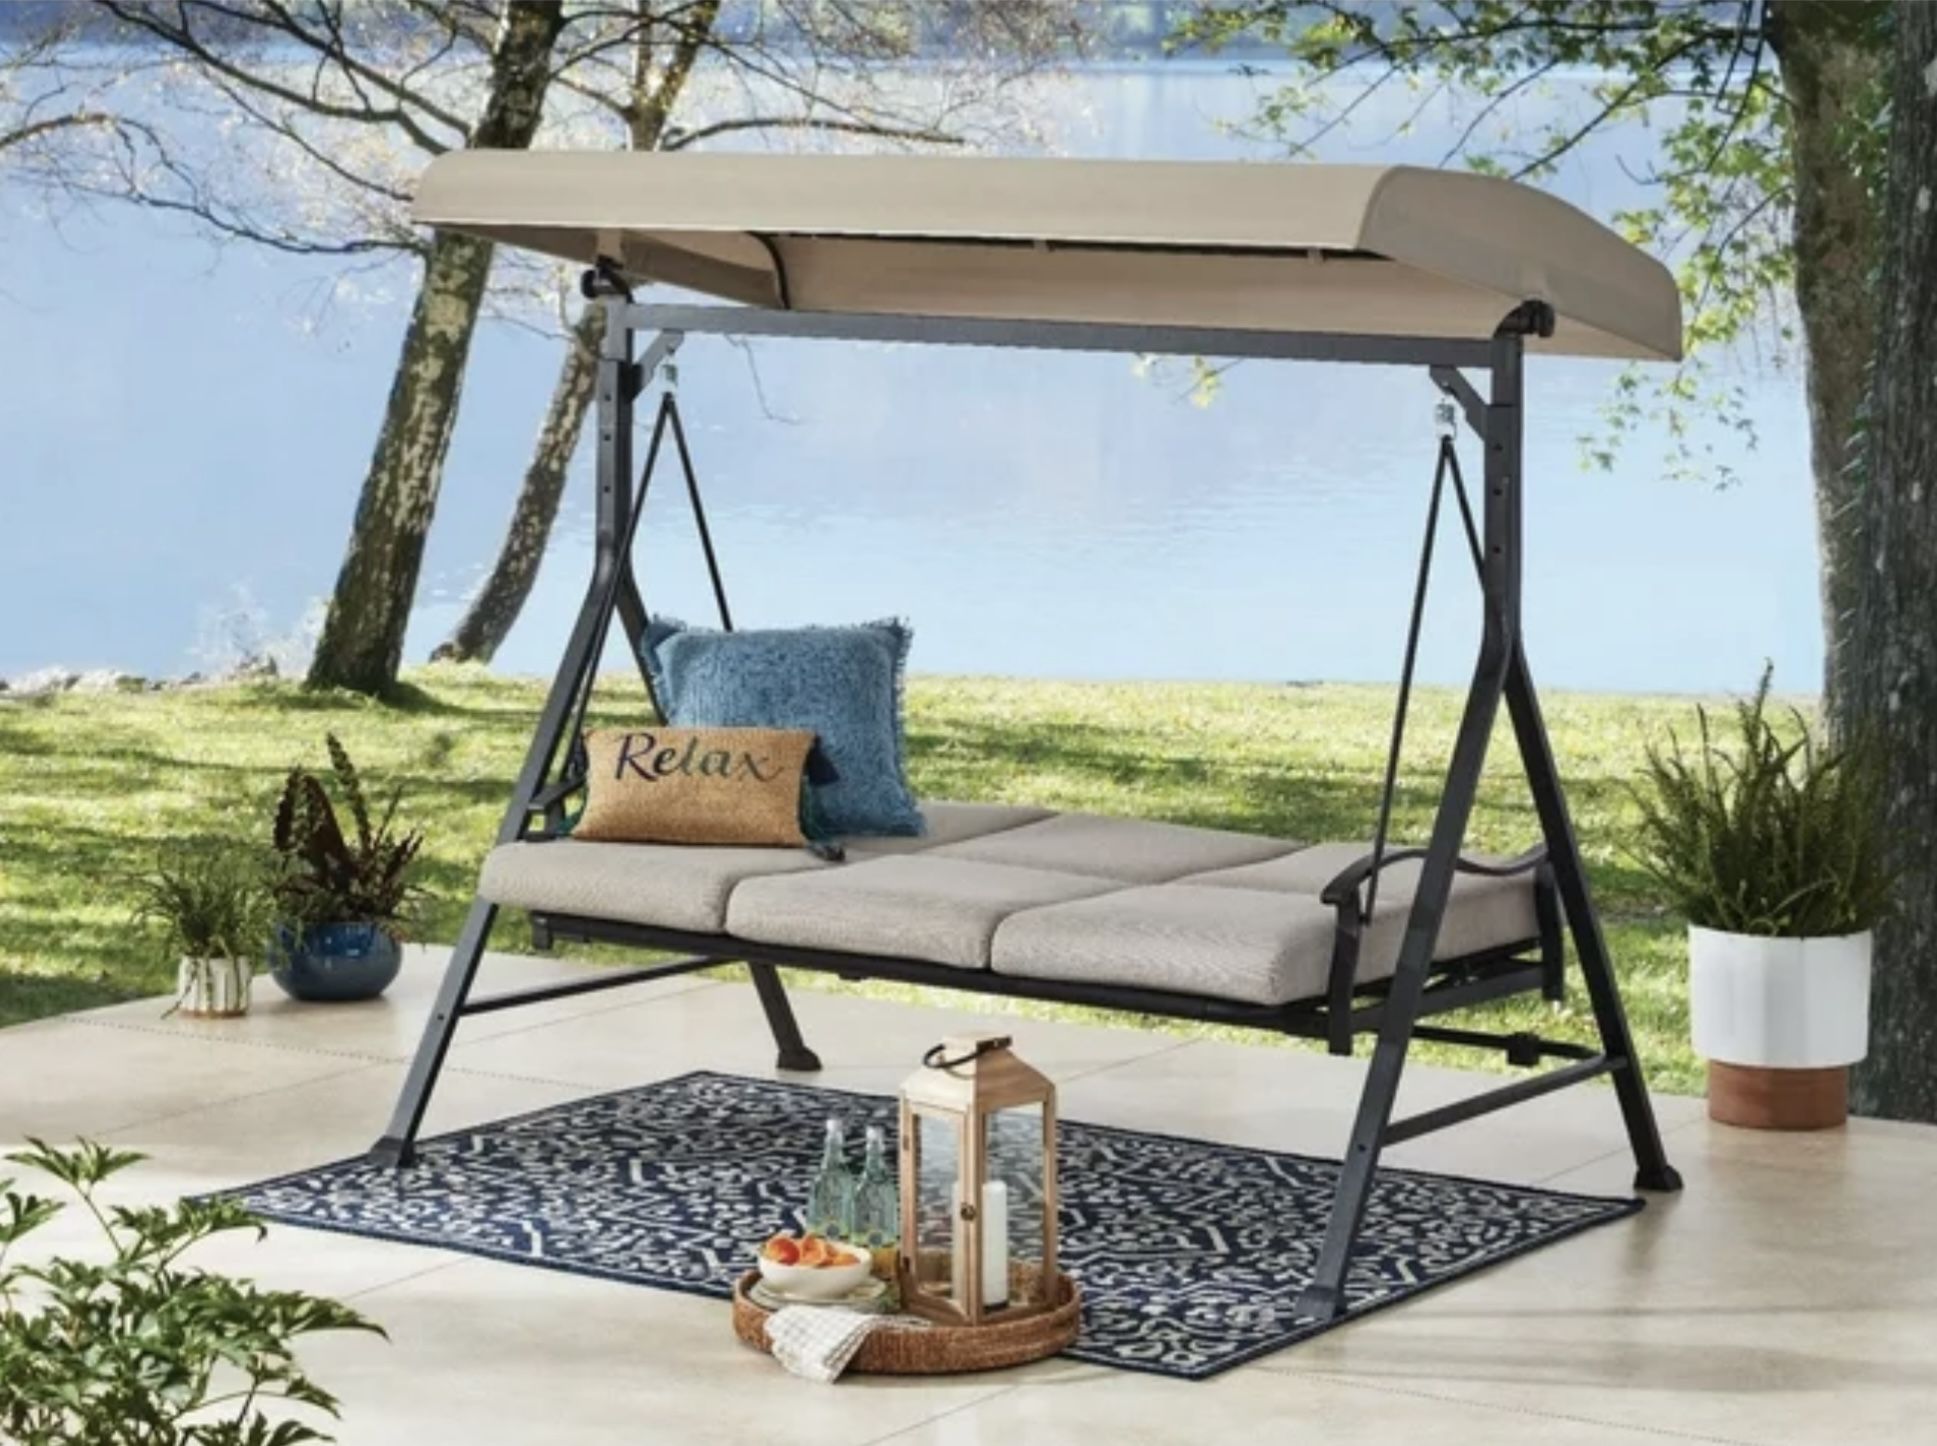 NEW Mainstays Belden Park 3 Person Convertible Daybed Outdoor Steel Porch Swing with Canopy - Beige (with Waterproof Cover)